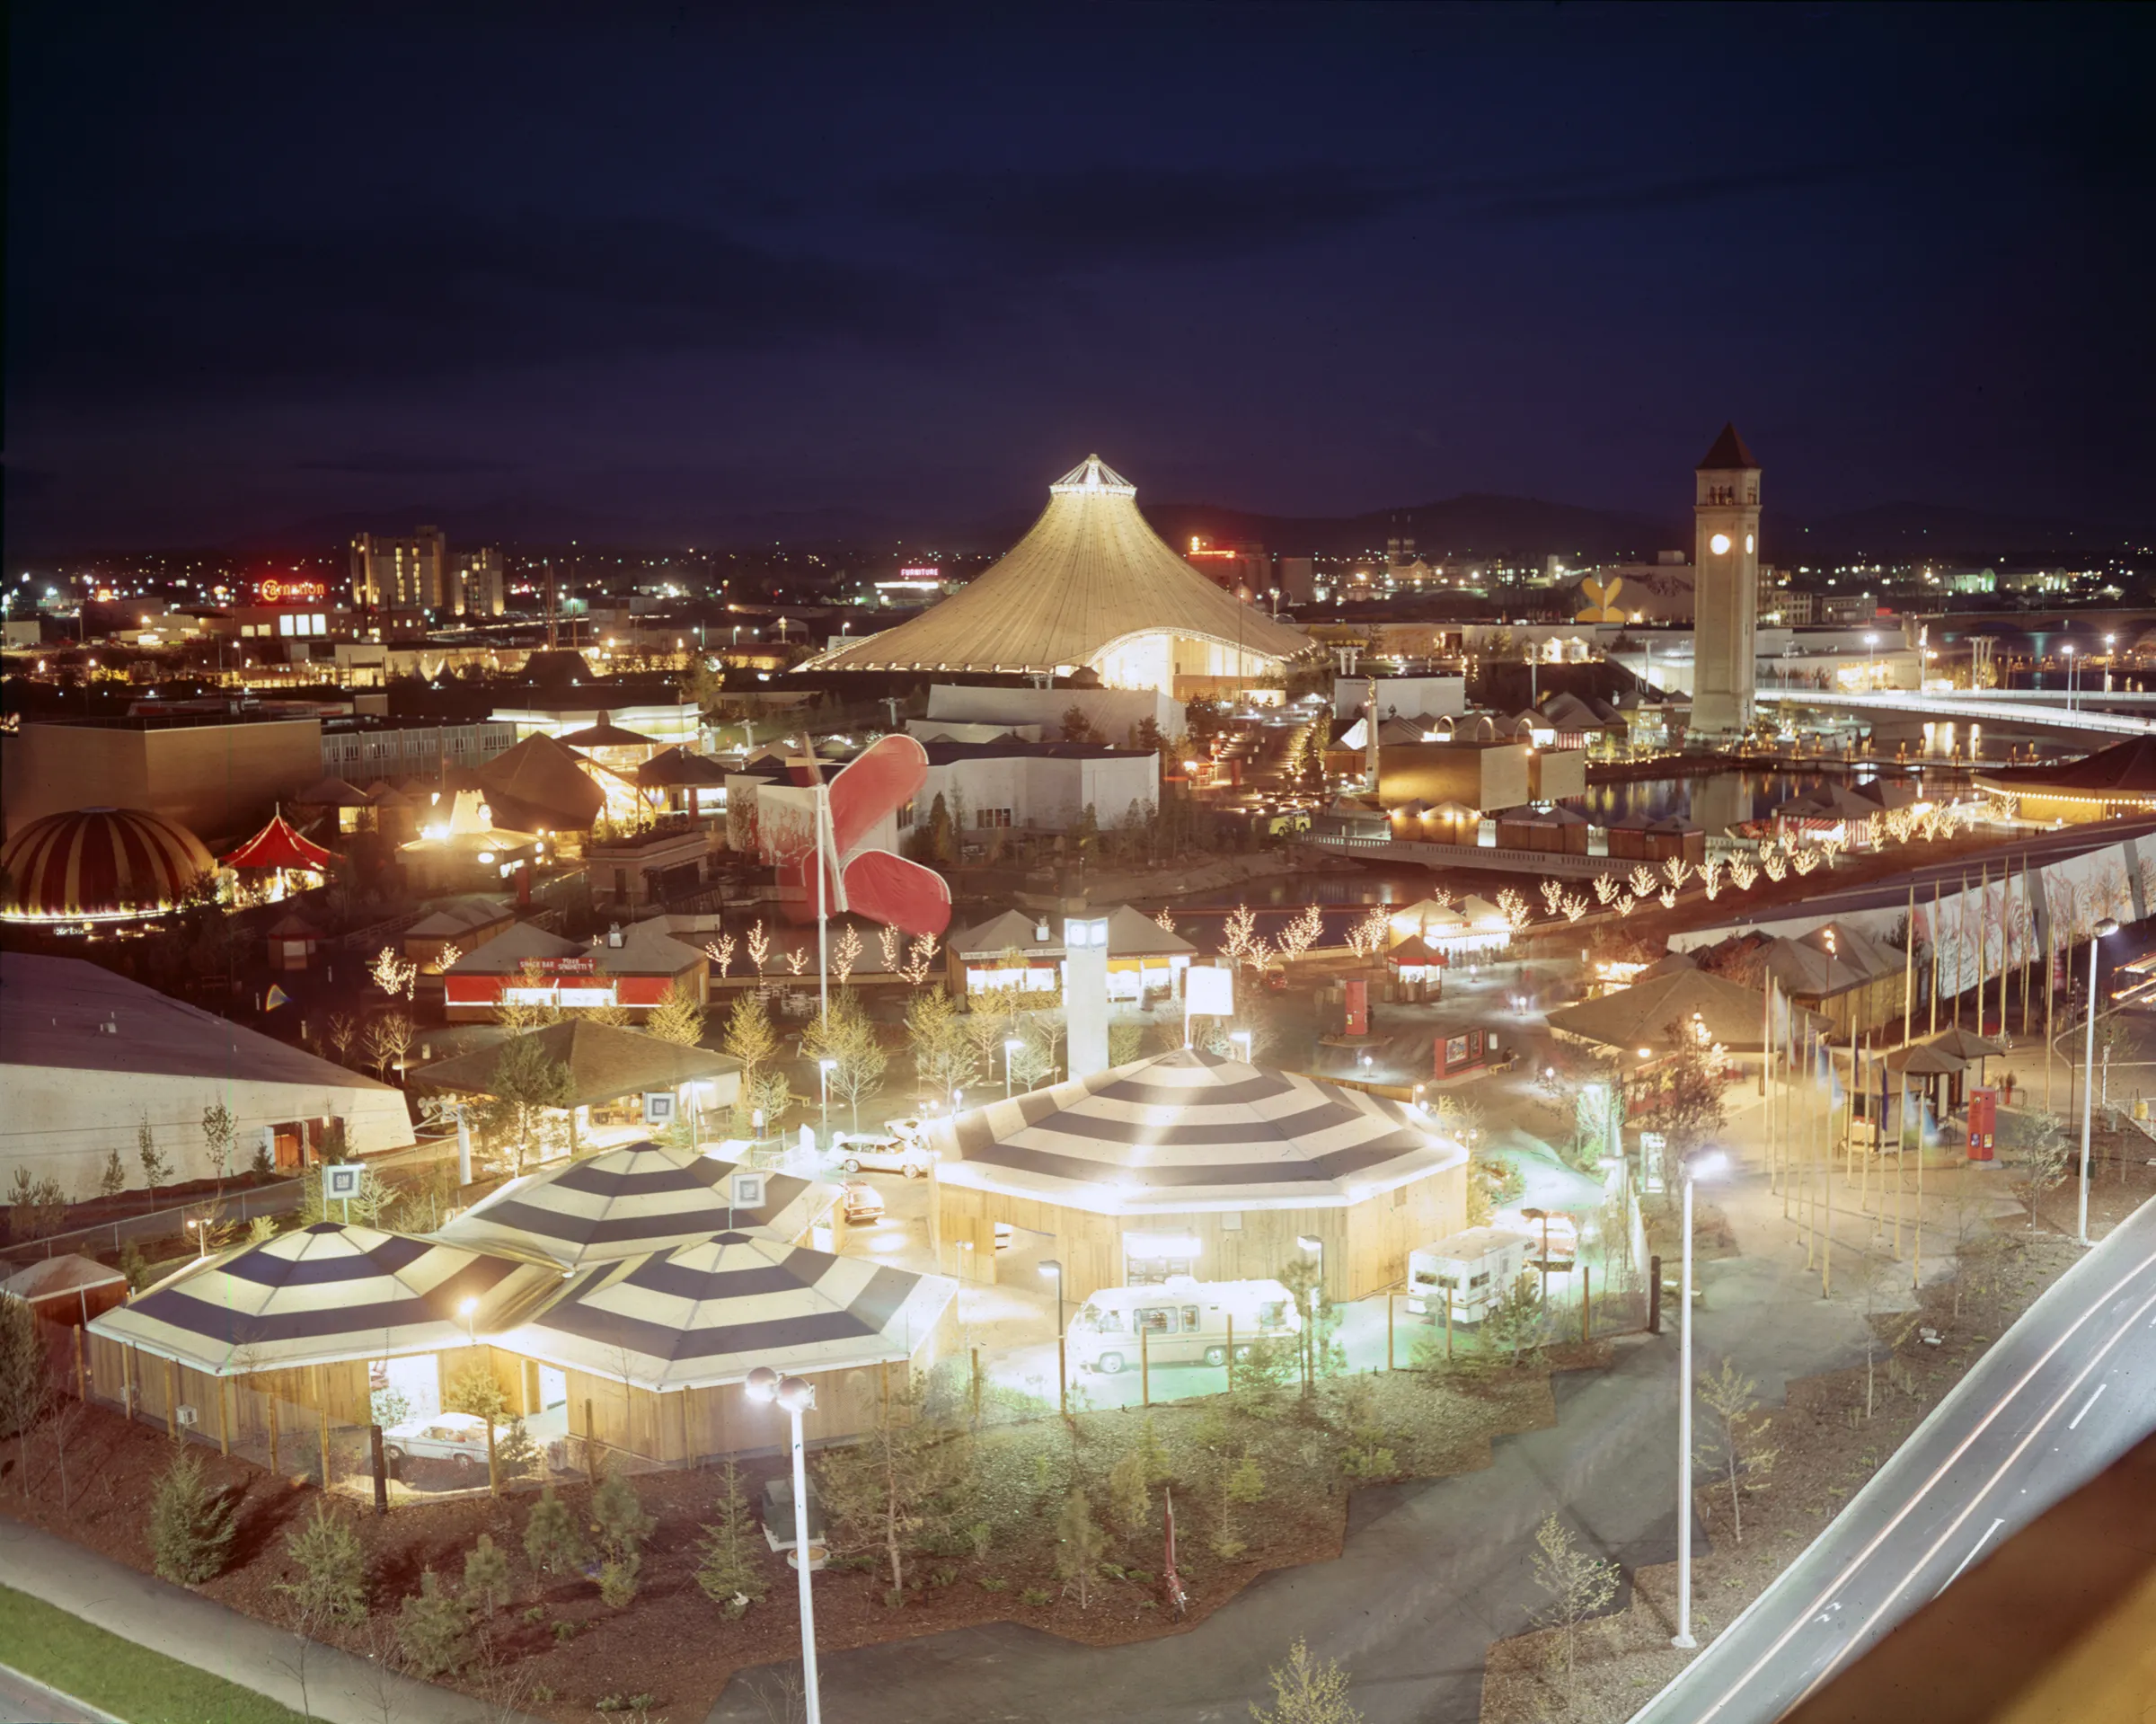 A photo taken during Expo '74 showing the pavillion at night, all lit up.